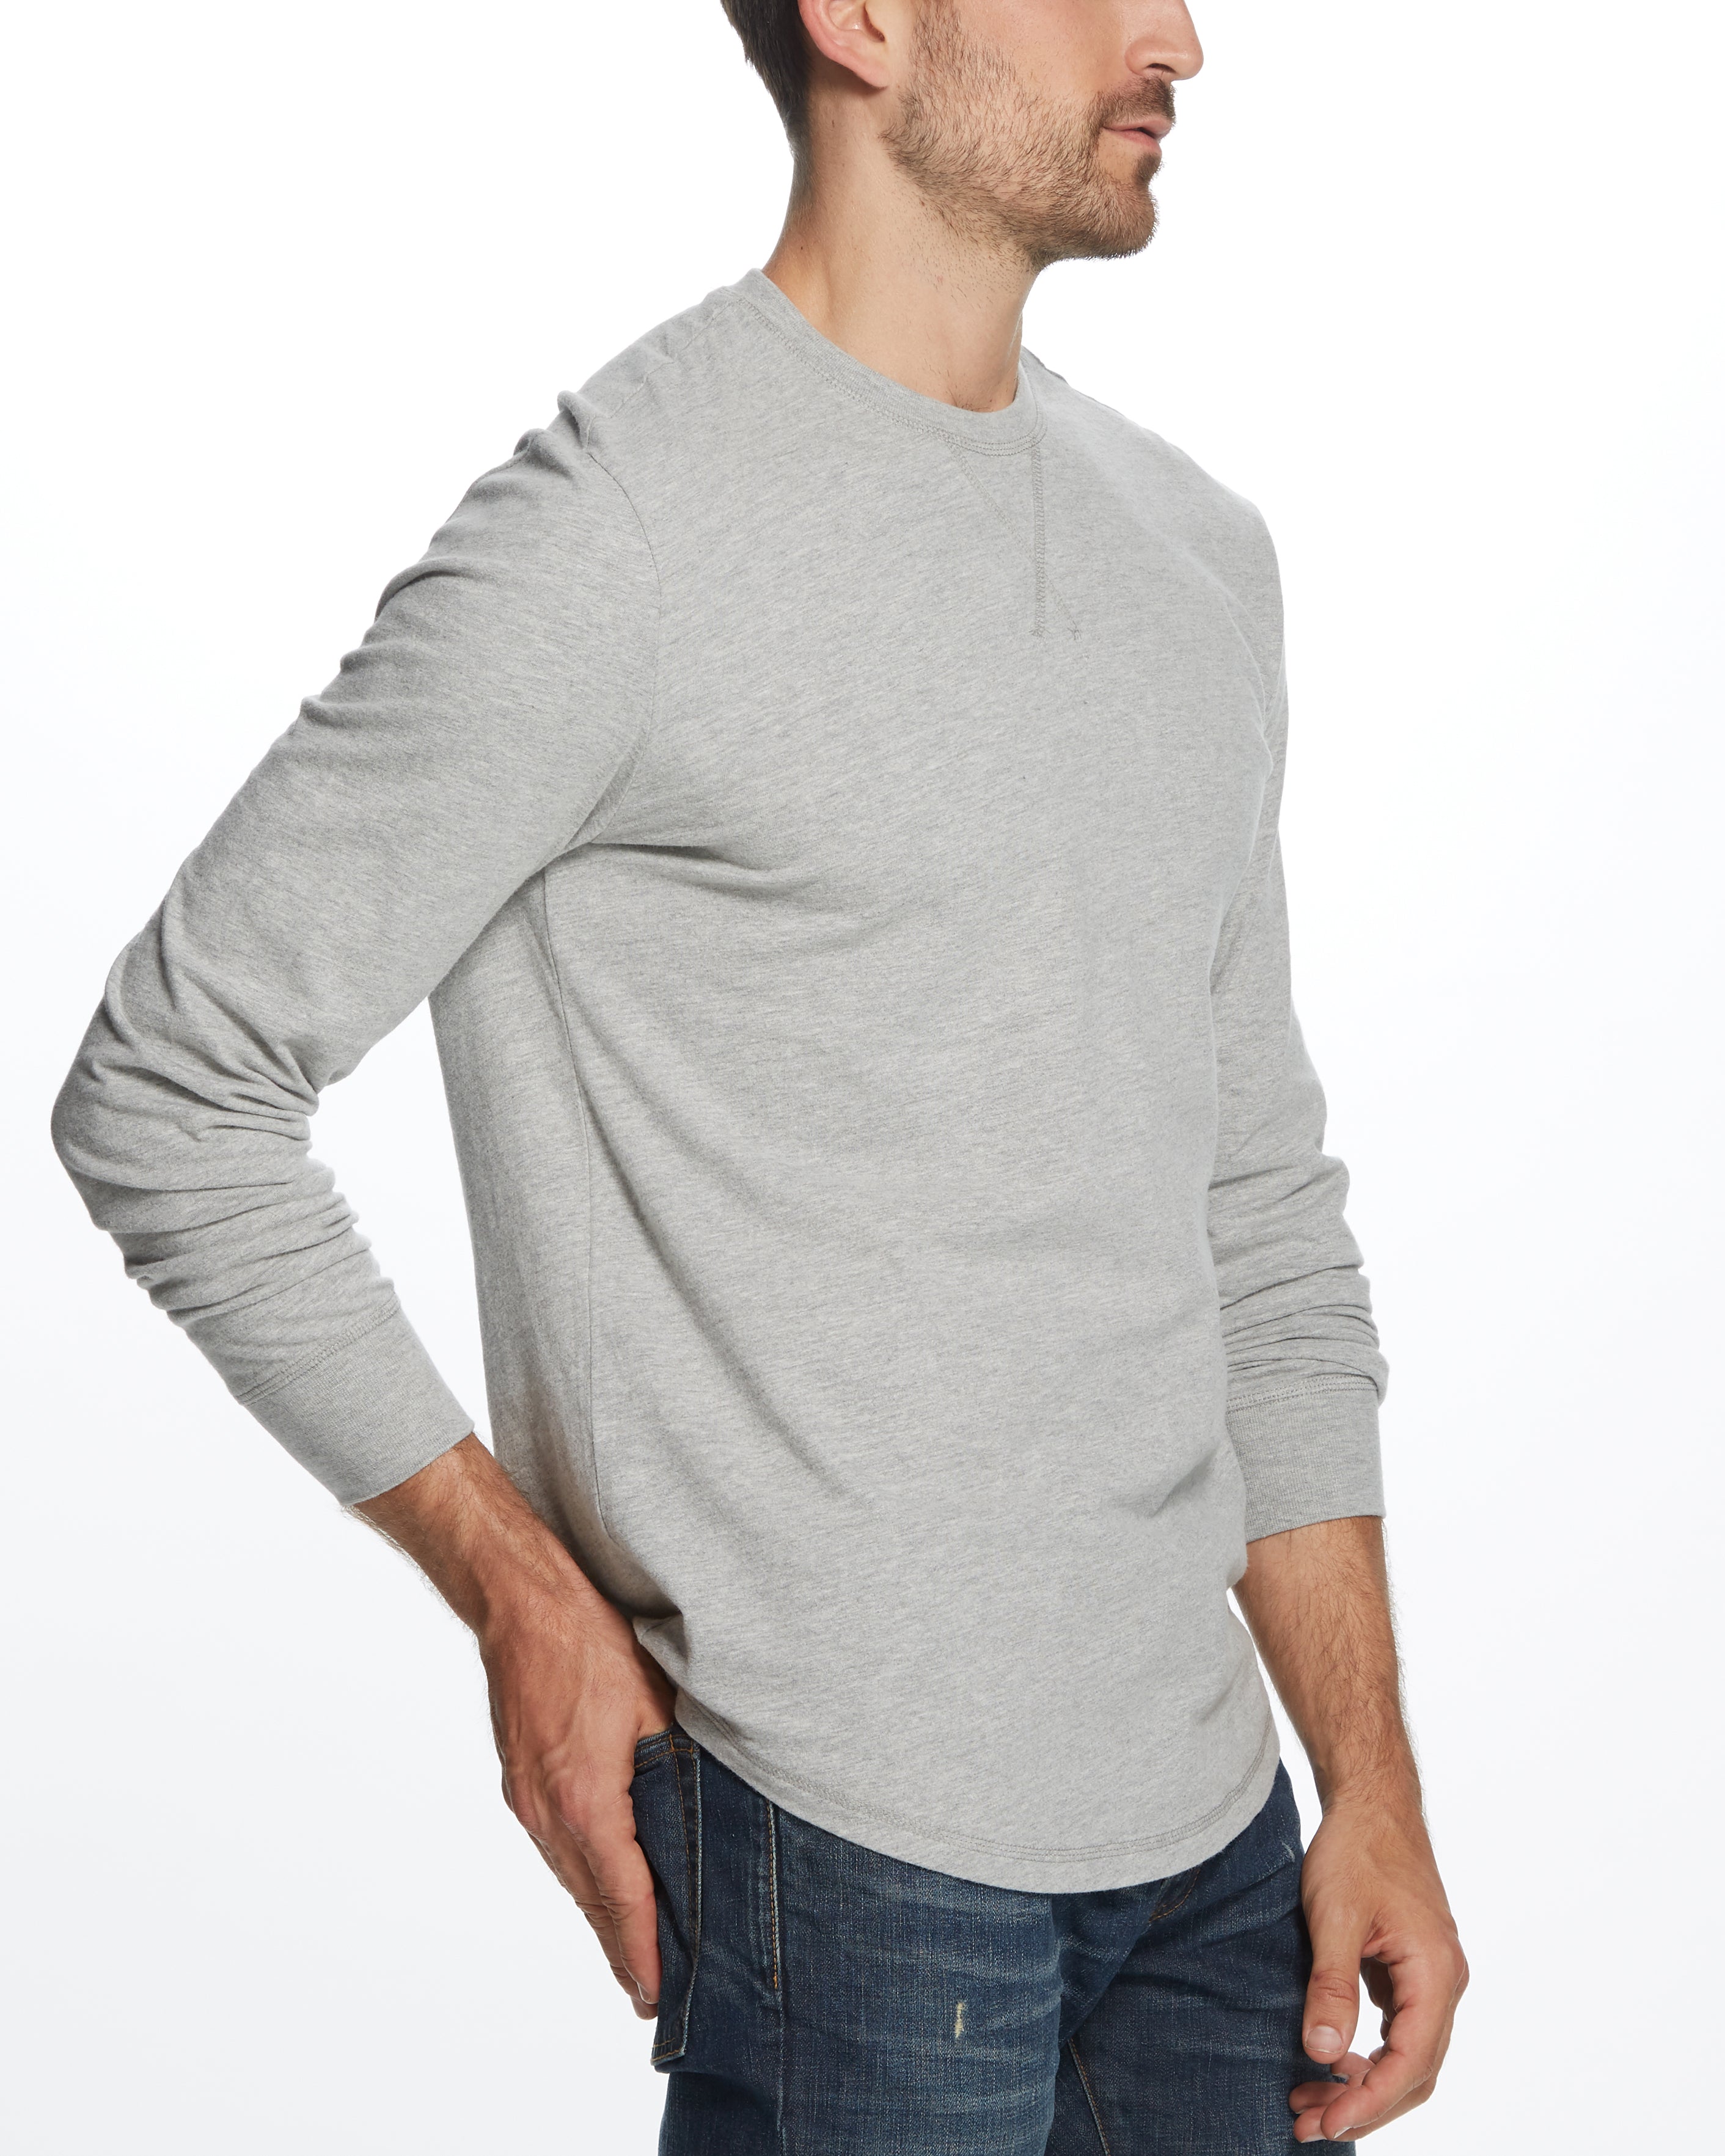 LONG SLEEVE BRUSHED CREW IN LIGHT GREY HEATHER